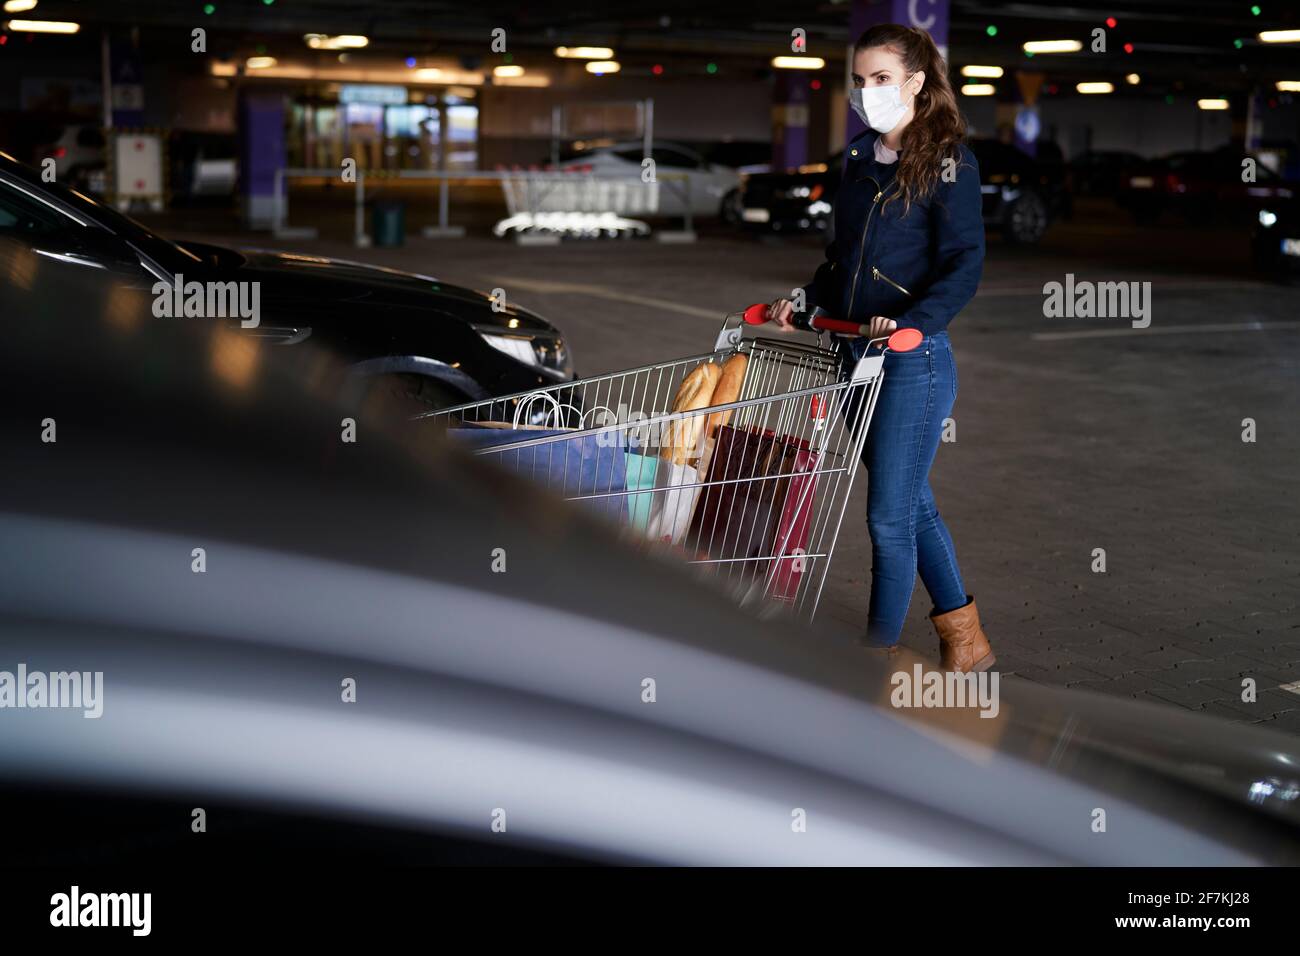 Woman with shopping cart in the parking during a pandemic Stock Photo